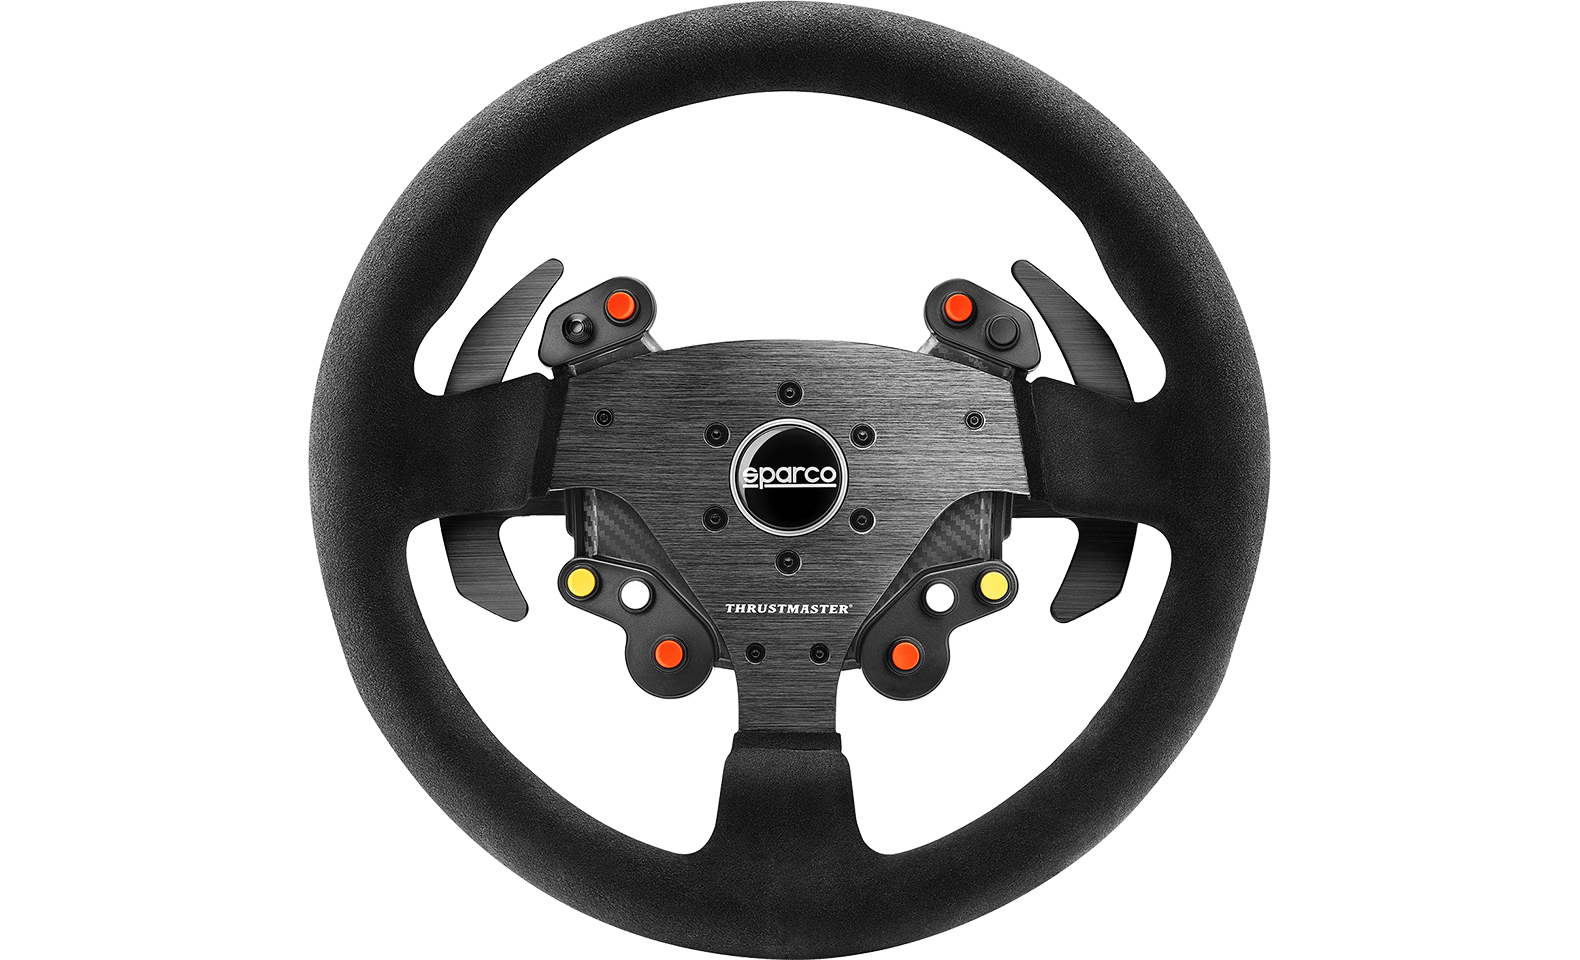 https://www.thrustmaster.com/wp-content/uploads/2021/09/UTH-rally-r383-wheel-2-1.png